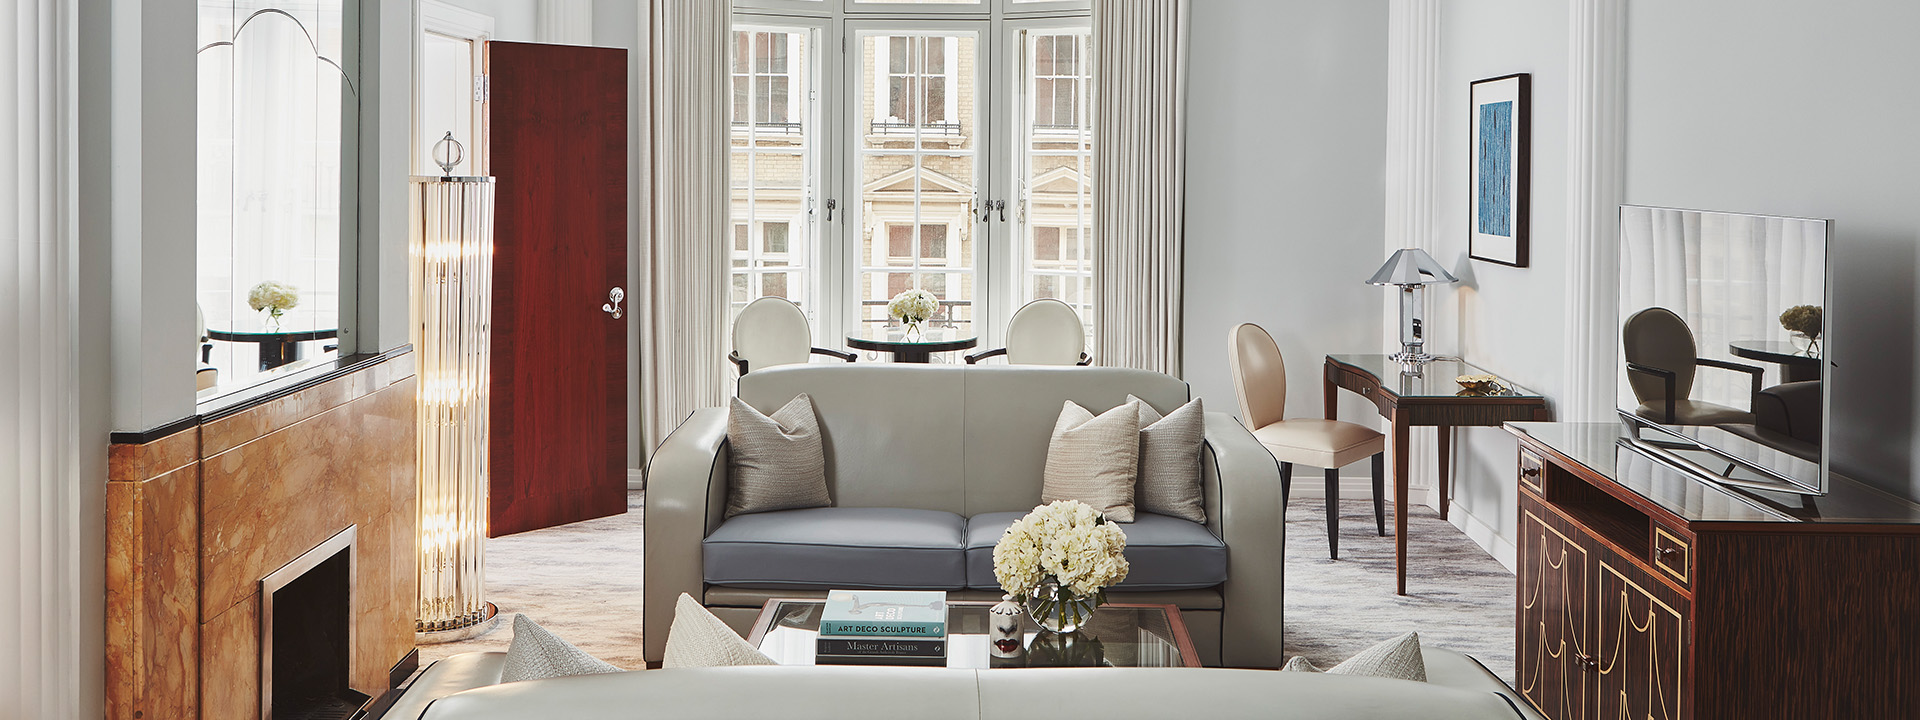 A view of the sofa in Claridge's Suite, with luxurious interior details and lots of natural daylight.